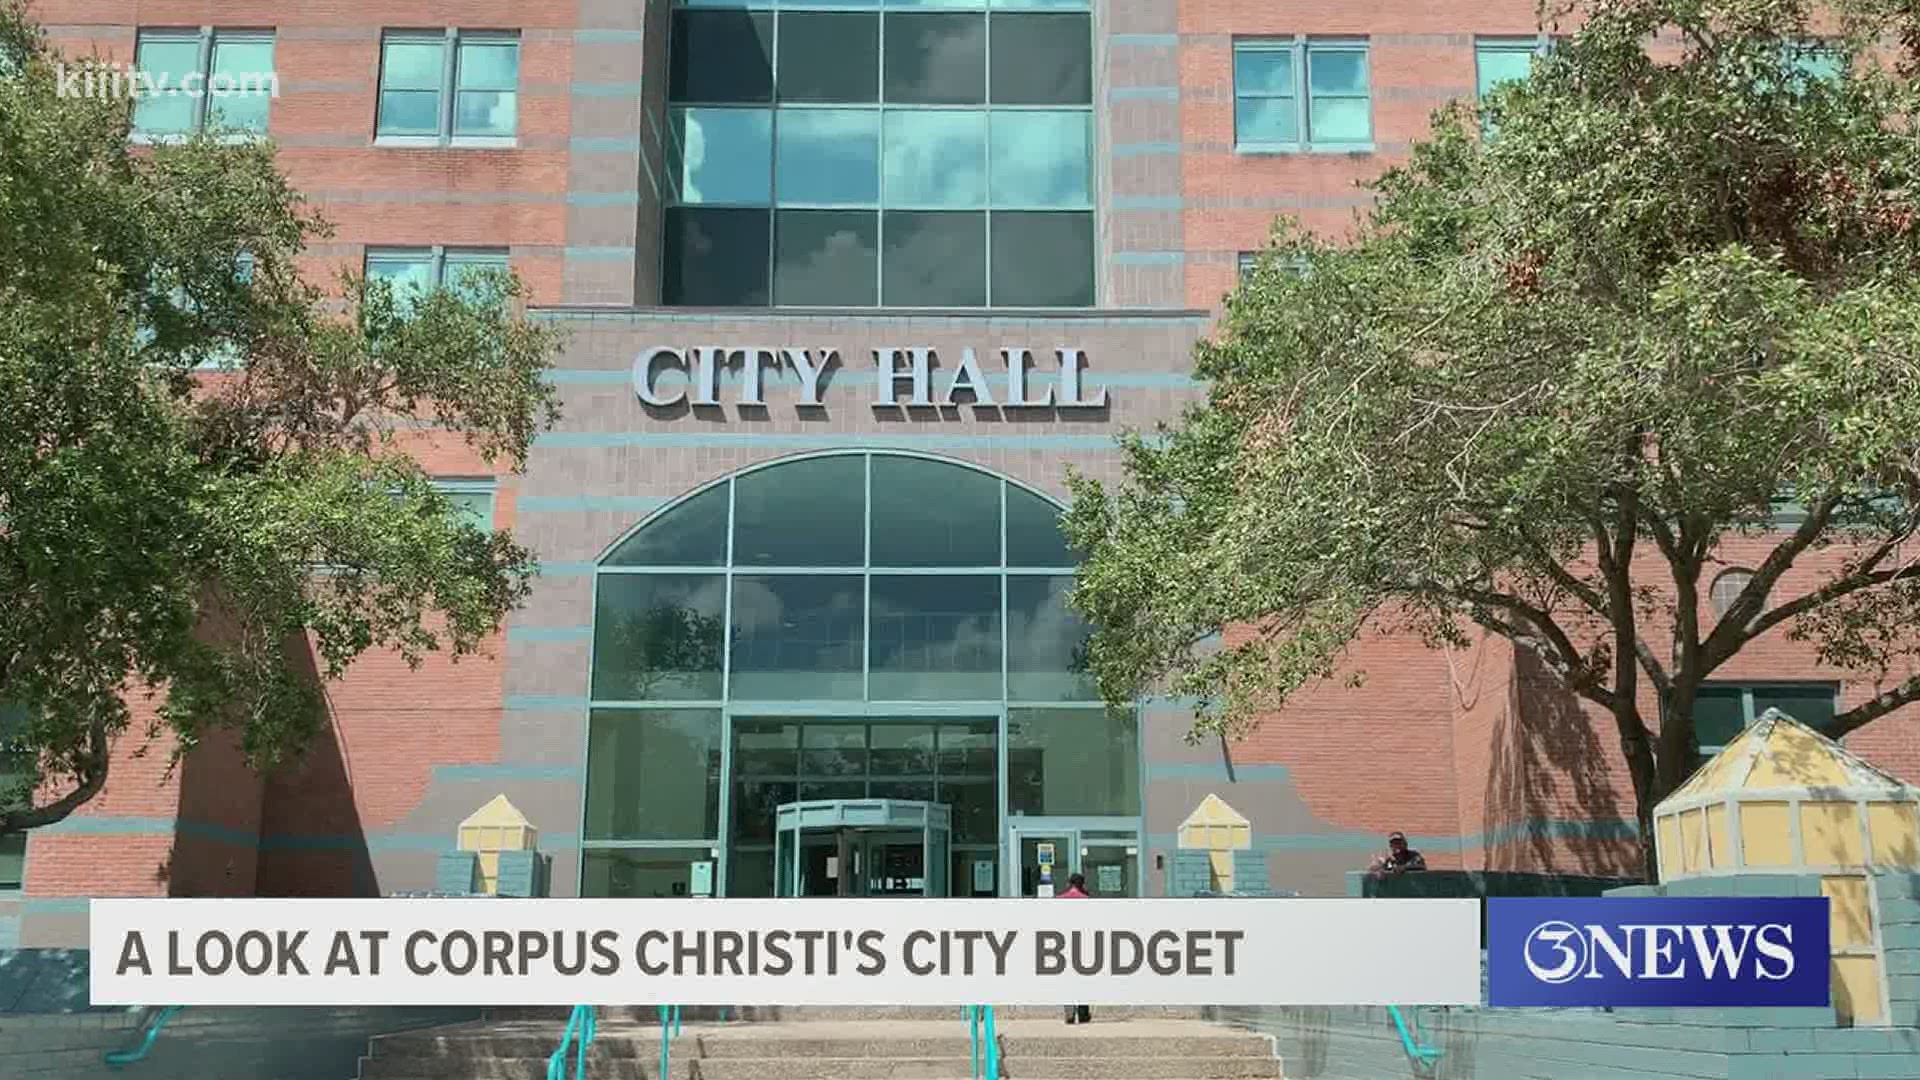 City Manager Peter Zanoni updated city council members on how the city is doing financially. It turns out revenues are up and expenses are down.